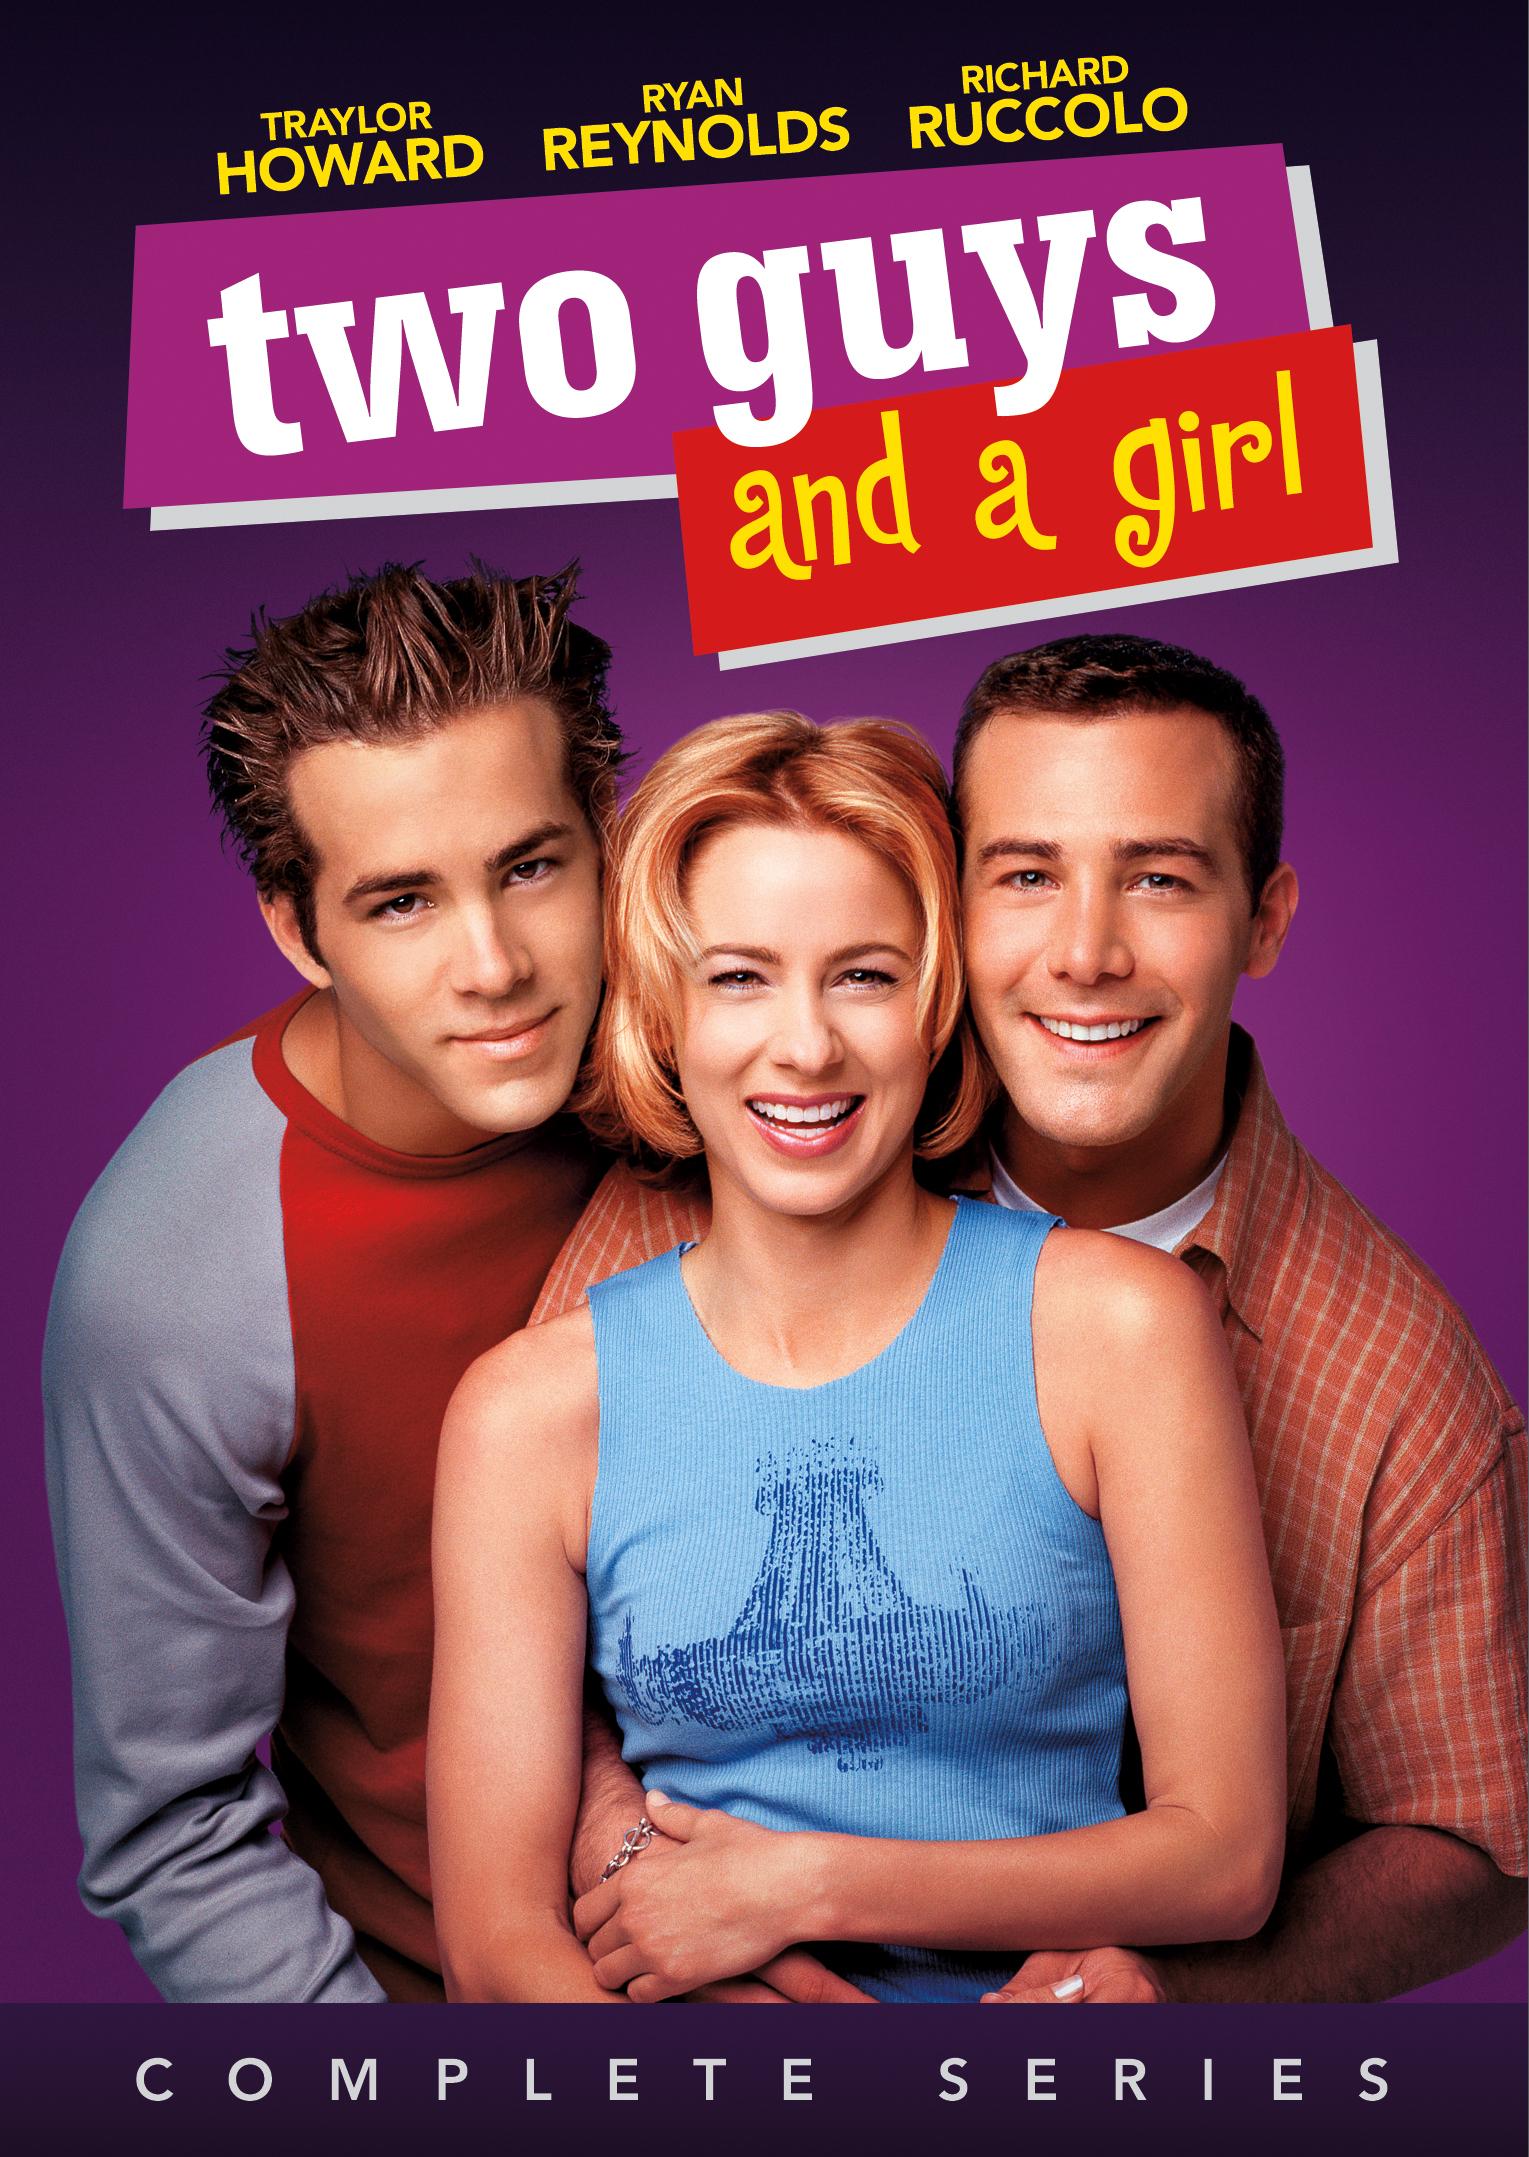 two-guys-and-a-girl-the-complete-series-dvd-cover.jpg